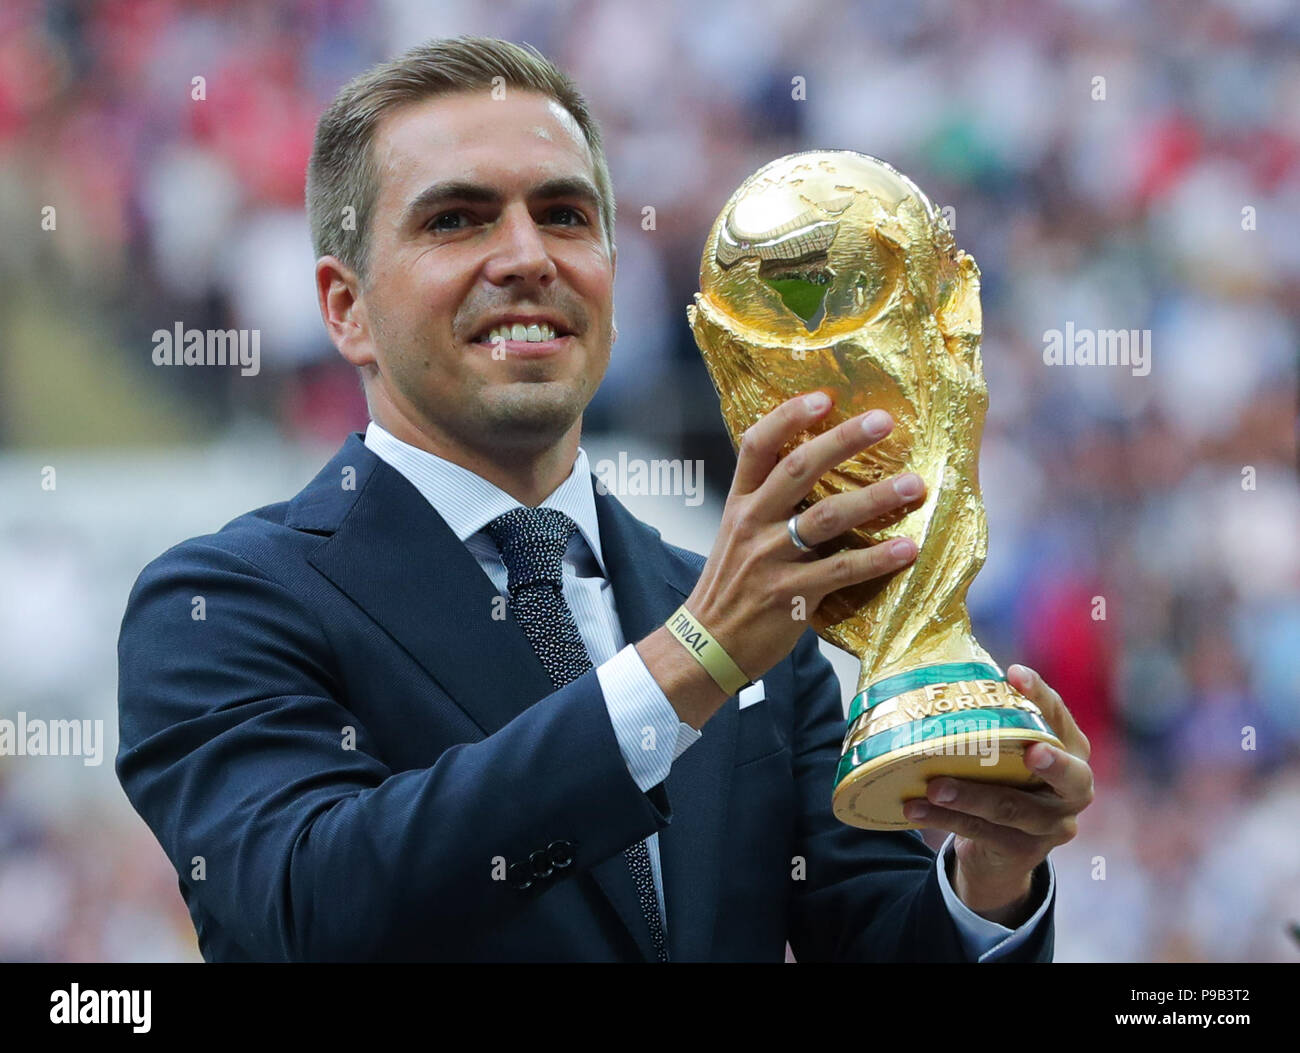 Moscow, Russia. 15th July, 2018. Soccer, World Cup, France vs Croatia, final at the Luschniki stadium. Philipp Lahm from Germany, who won the world cup in 2014, presenting the world cup trophy in the stadium before the start of the game. Credit: Christian Charisius/dpa/Alamy Live News Stock Photo